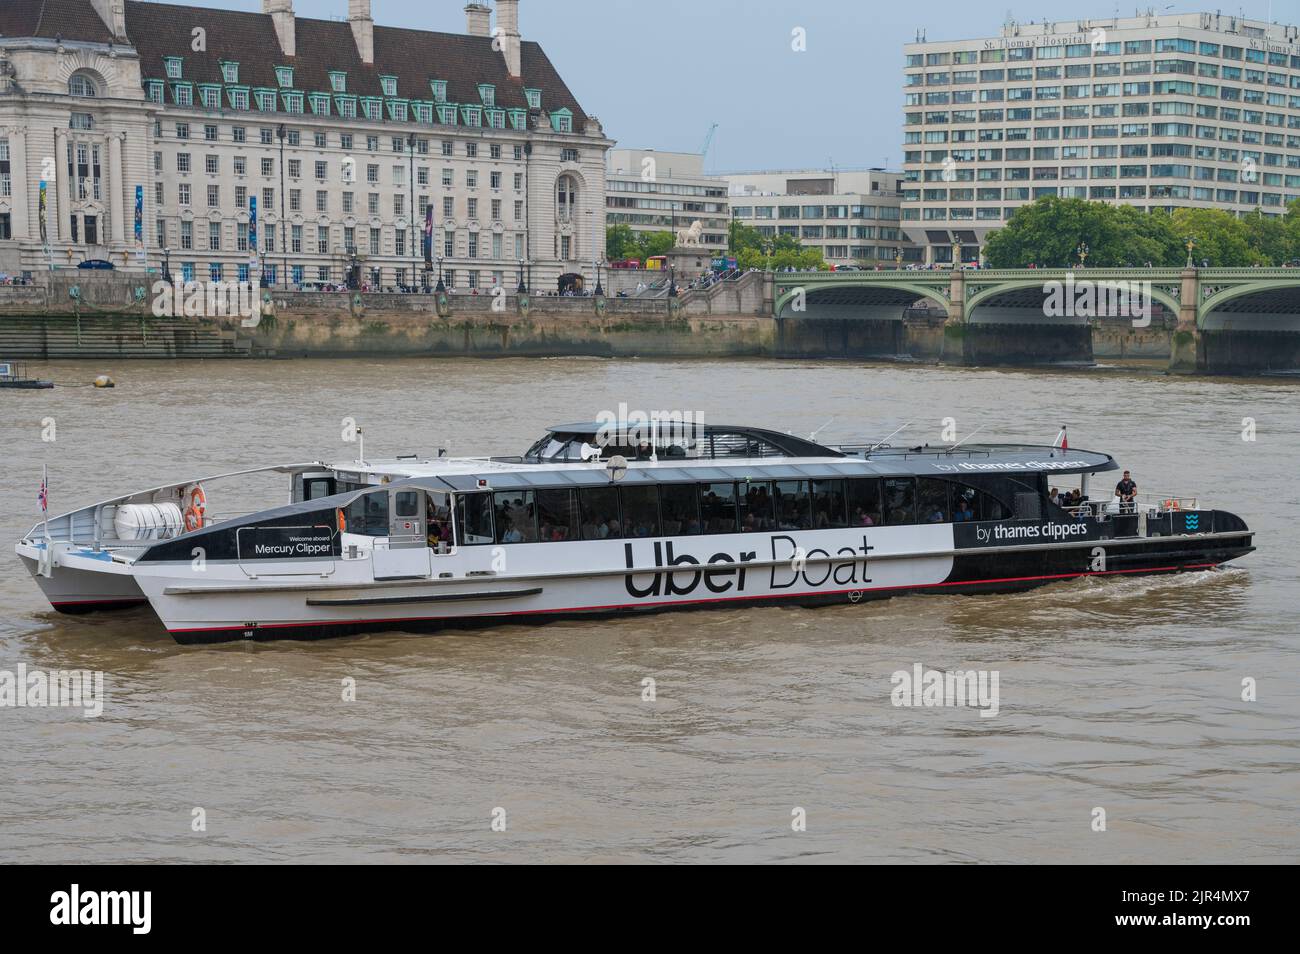 Mercury Clipper, MBNA Thames Clippers Uber Boat river bus vessel reversing to dock at Westminster Millennium Pier, London, England, UK Stock Photo